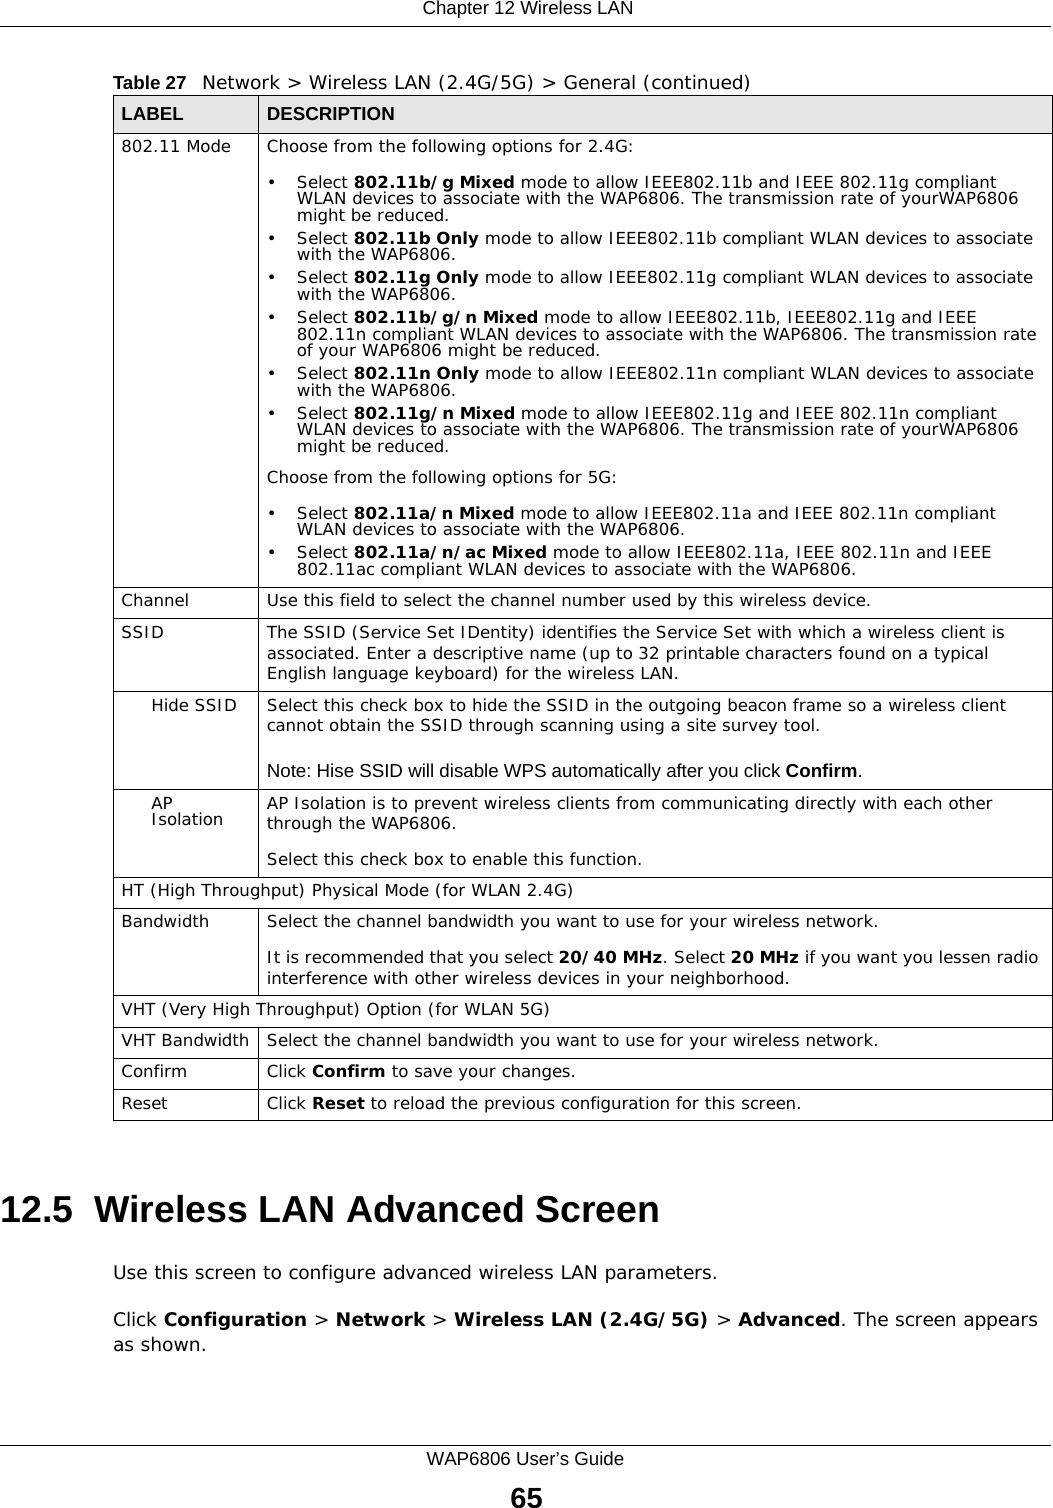  Chapter 12 Wireless LANWAP6806 User’s Guide6512.5  Wireless LAN Advanced ScreenUse this screen to configure advanced wireless LAN parameters.Click Configuration &gt; Network &gt; Wireless LAN (2.4G/5G) &gt; Advanced. The screen appears as shown.802.11 Mode Choose from the following options for 2.4G:• Select 802.11b/g Mixed mode to allow IEEE802.11b and IEEE 802.11g compliant WLAN devices to associate with the WAP6806. The transmission rate of yourWAP6806 might be reduced.• Select 802.11b Only mode to allow IEEE802.11b compliant WLAN devices to associate with the WAP6806.• Select 802.11g Only mode to allow IEEE802.11g compliant WLAN devices to associate with the WAP6806.• Select 802.11b/g/n Mixed mode to allow IEEE802.11b, IEEE802.11g and IEEE 802.11n compliant WLAN devices to associate with the WAP6806. The transmission rate of your WAP6806 might be reduced.• Select 802.11n Only mode to allow IEEE802.11n compliant WLAN devices to associate with the WAP6806.• Select 802.11g/n Mixed mode to allow IEEE802.11g and IEEE 802.11n compliant WLAN devices to associate with the WAP6806. The transmission rate of yourWAP6806 might be reduced.Choose from the following options for 5G:• Select 802.11a/n Mixed mode to allow IEEE802.11a and IEEE 802.11n compliant WLAN devices to associate with the WAP6806. • Select 802.11a/n/ac Mixed mode to allow IEEE802.11a, IEEE 802.11n and IEEE 802.11ac compliant WLAN devices to associate with the WAP6806.Channel Use this field to select the channel number used by this wireless device.SSID The SSID (Service Set IDentity) identifies the Service Set with which a wireless client is associated. Enter a descriptive name (up to 32 printable characters found on a typical English language keyboard) for the wireless LAN.Hide SSID Select this check box to hide the SSID in the outgoing beacon frame so a wireless client cannot obtain the SSID through scanning using a site survey tool.Note: Hise SSID will disable WPS automatically after you click Confirm.AP Isolation AP Isolation is to prevent wireless clients from communicating directly with each other through the WAP6806.Select this check box to enable this function.HT (High Throughput) Physical Mode (for WLAN 2.4G) Bandwidth Select the channel bandwidth you want to use for your wireless network.It is recommended that you select 20/40 MHz. Select 20 MHz if you want you lessen radio interference with other wireless devices in your neighborhood.VHT (Very High Throughput) Option (for WLAN 5G)VHT Bandwidth Select the channel bandwidth you want to use for your wireless network.Confirm Click Confirm to save your changes.Reset Click Reset to reload the previous configuration for this screen.Table 27   Network &gt; Wireless LAN (2.4G/5G) &gt; General (continued)LABEL DESCRIPTION